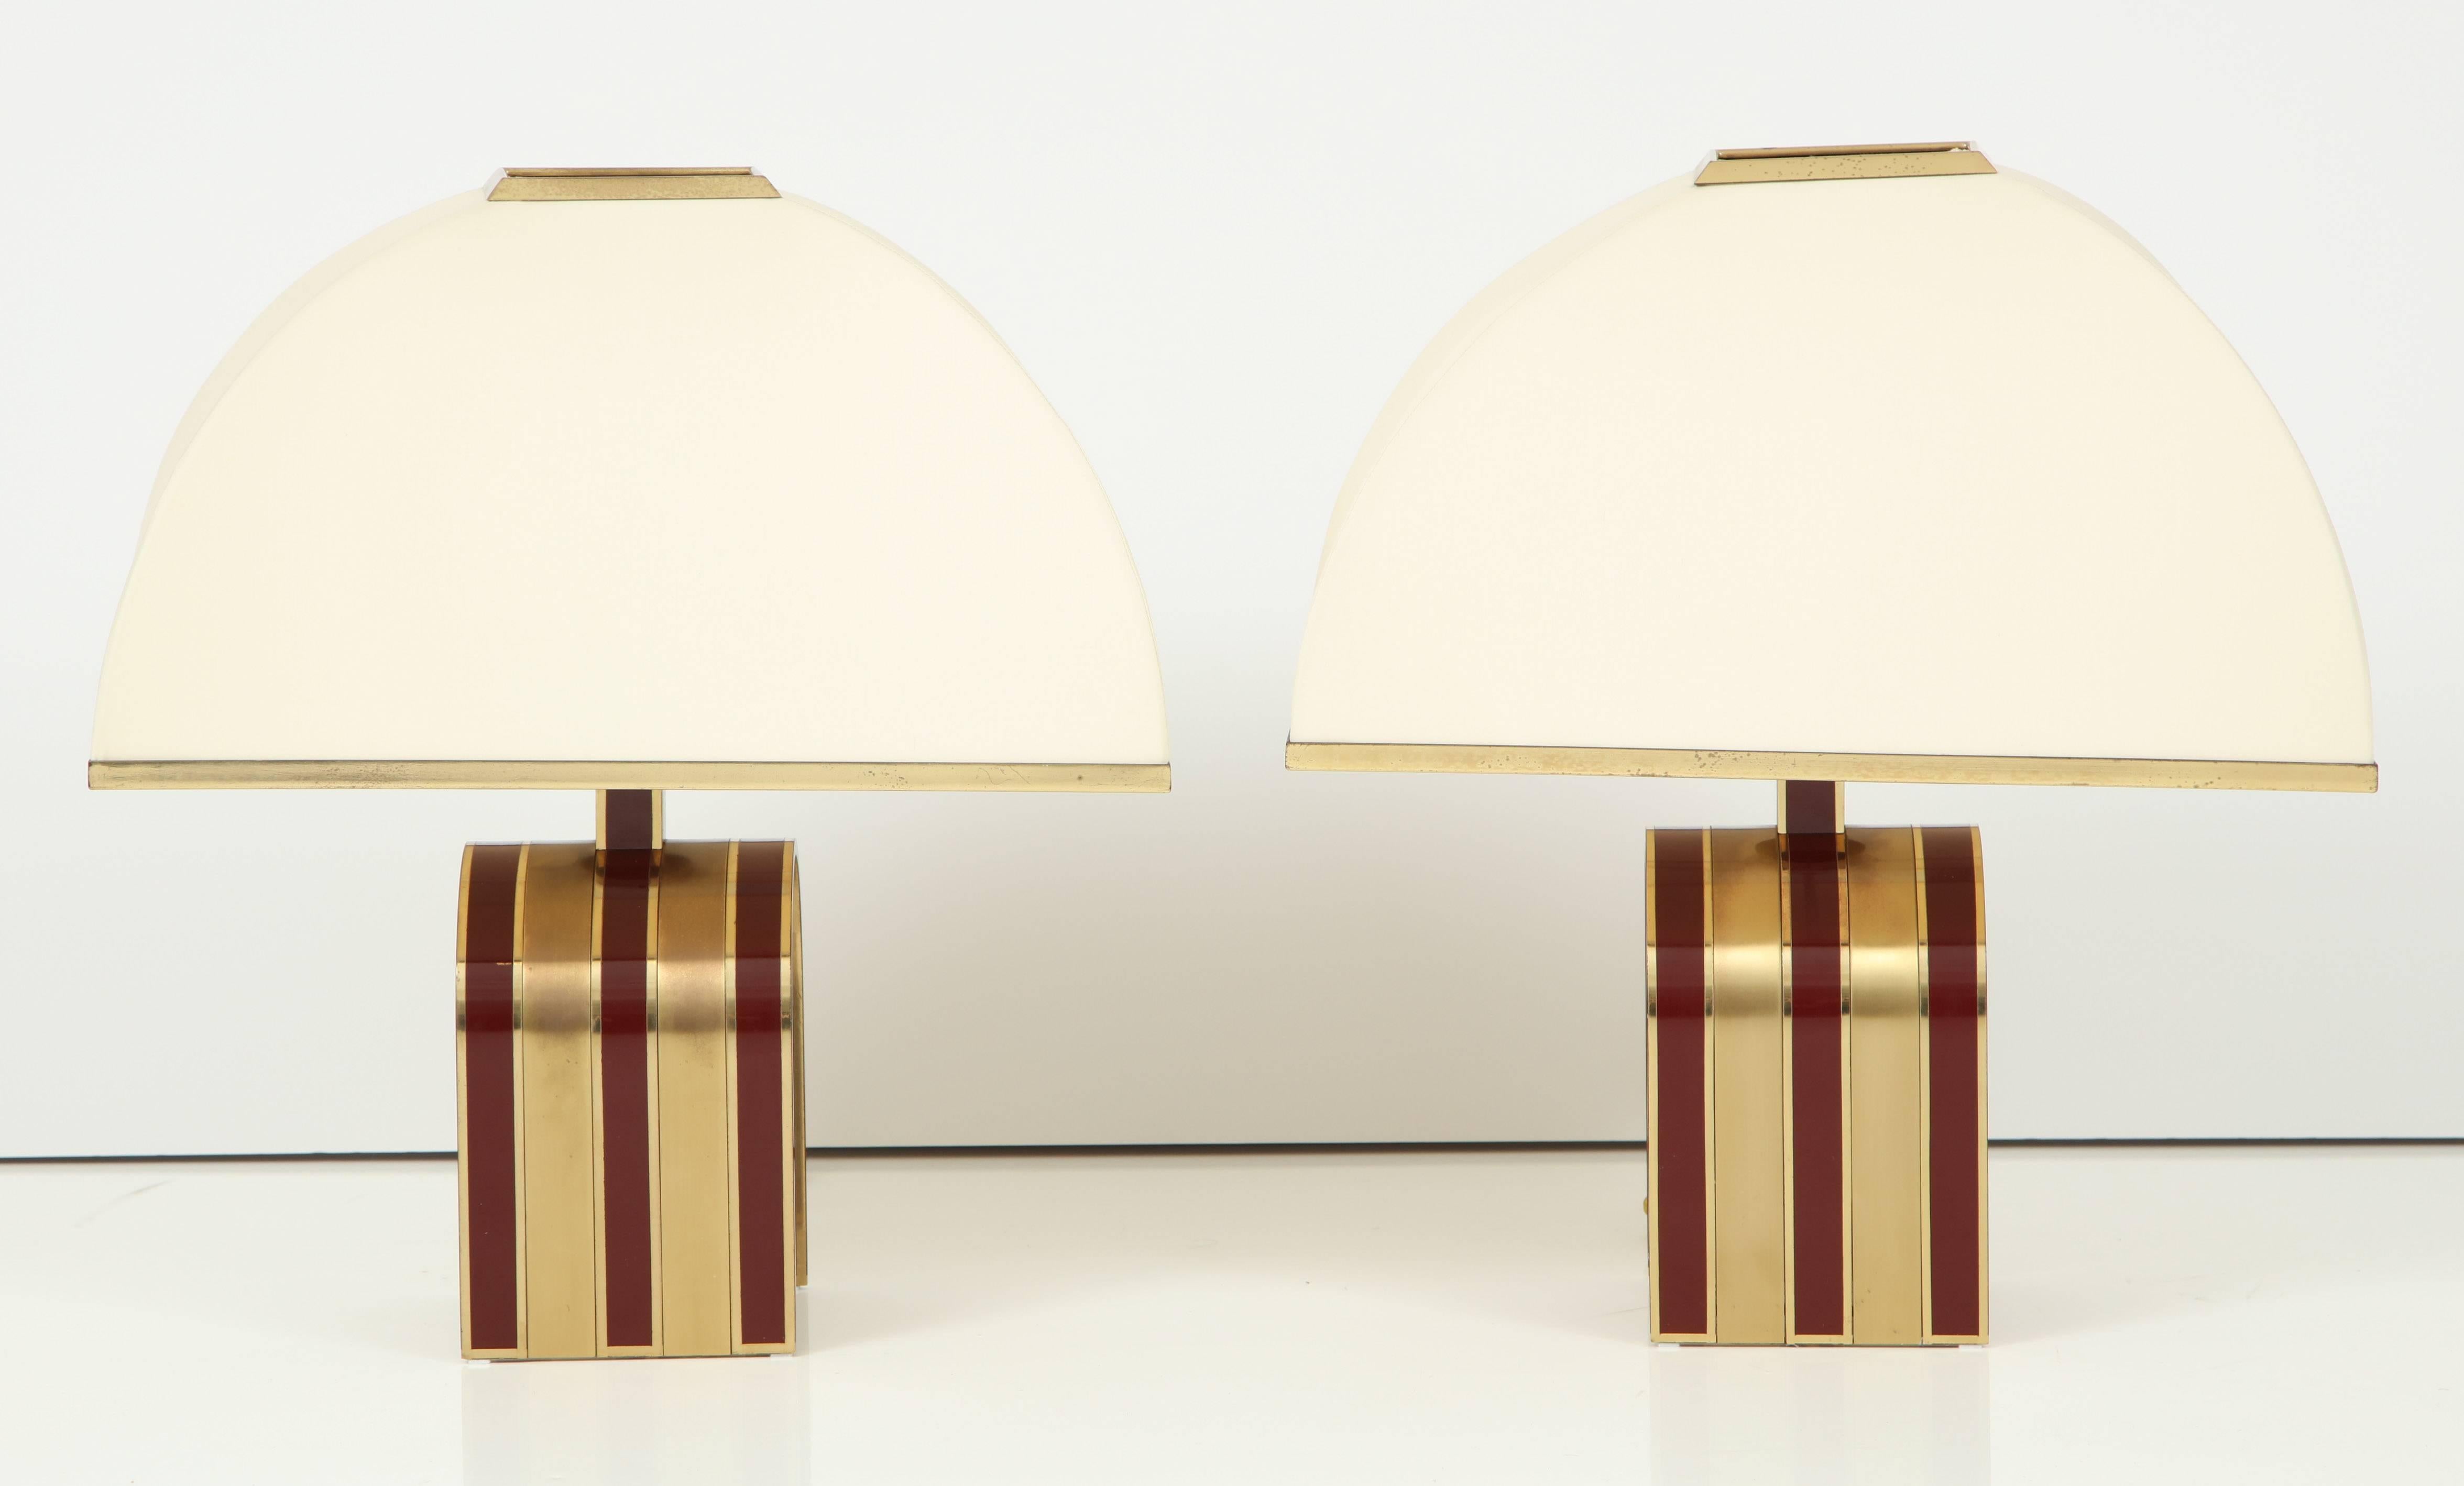 Pair of original U-shaped lamps attributed to Romeo Rega. Base is comprised of alternating enameled deep red (burgundy) and brass/gold stripes. Original dome shaped lampshades with solid brass edges. Rewired for U.S. use.

On display at the